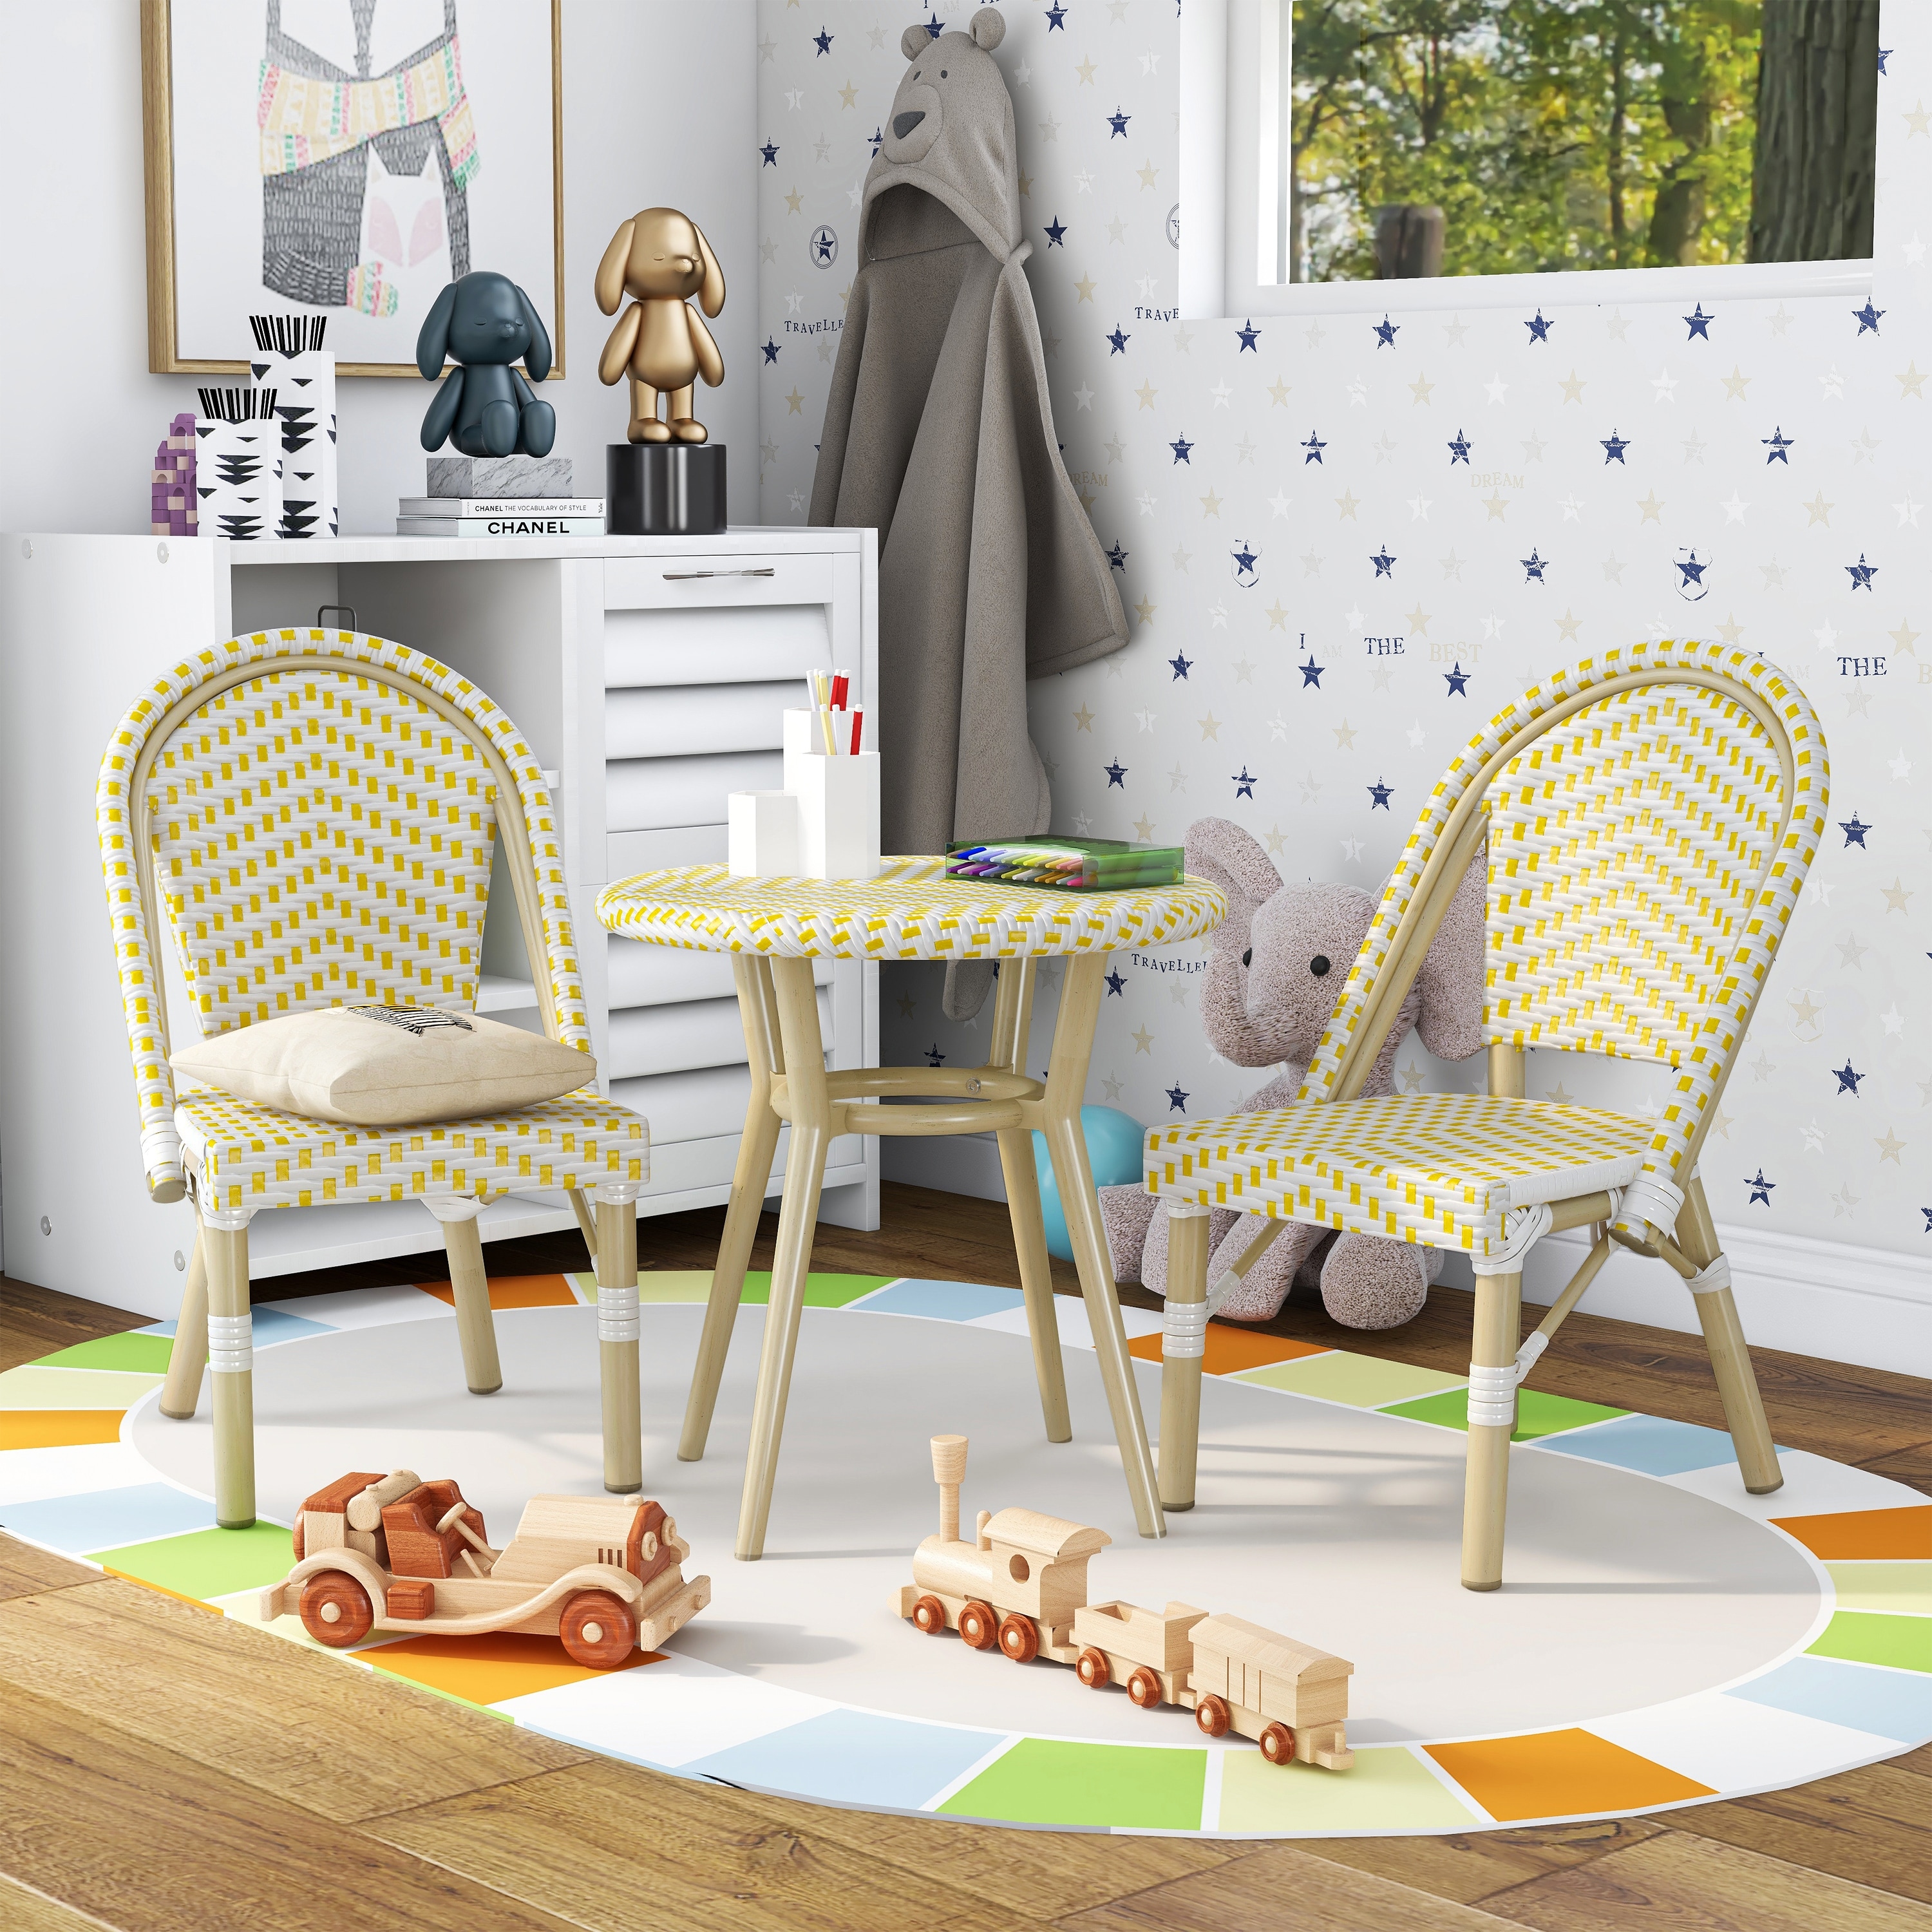 Qaba 3-in-1 Kids Activity Table and Chairs Set with 3 Surfaces